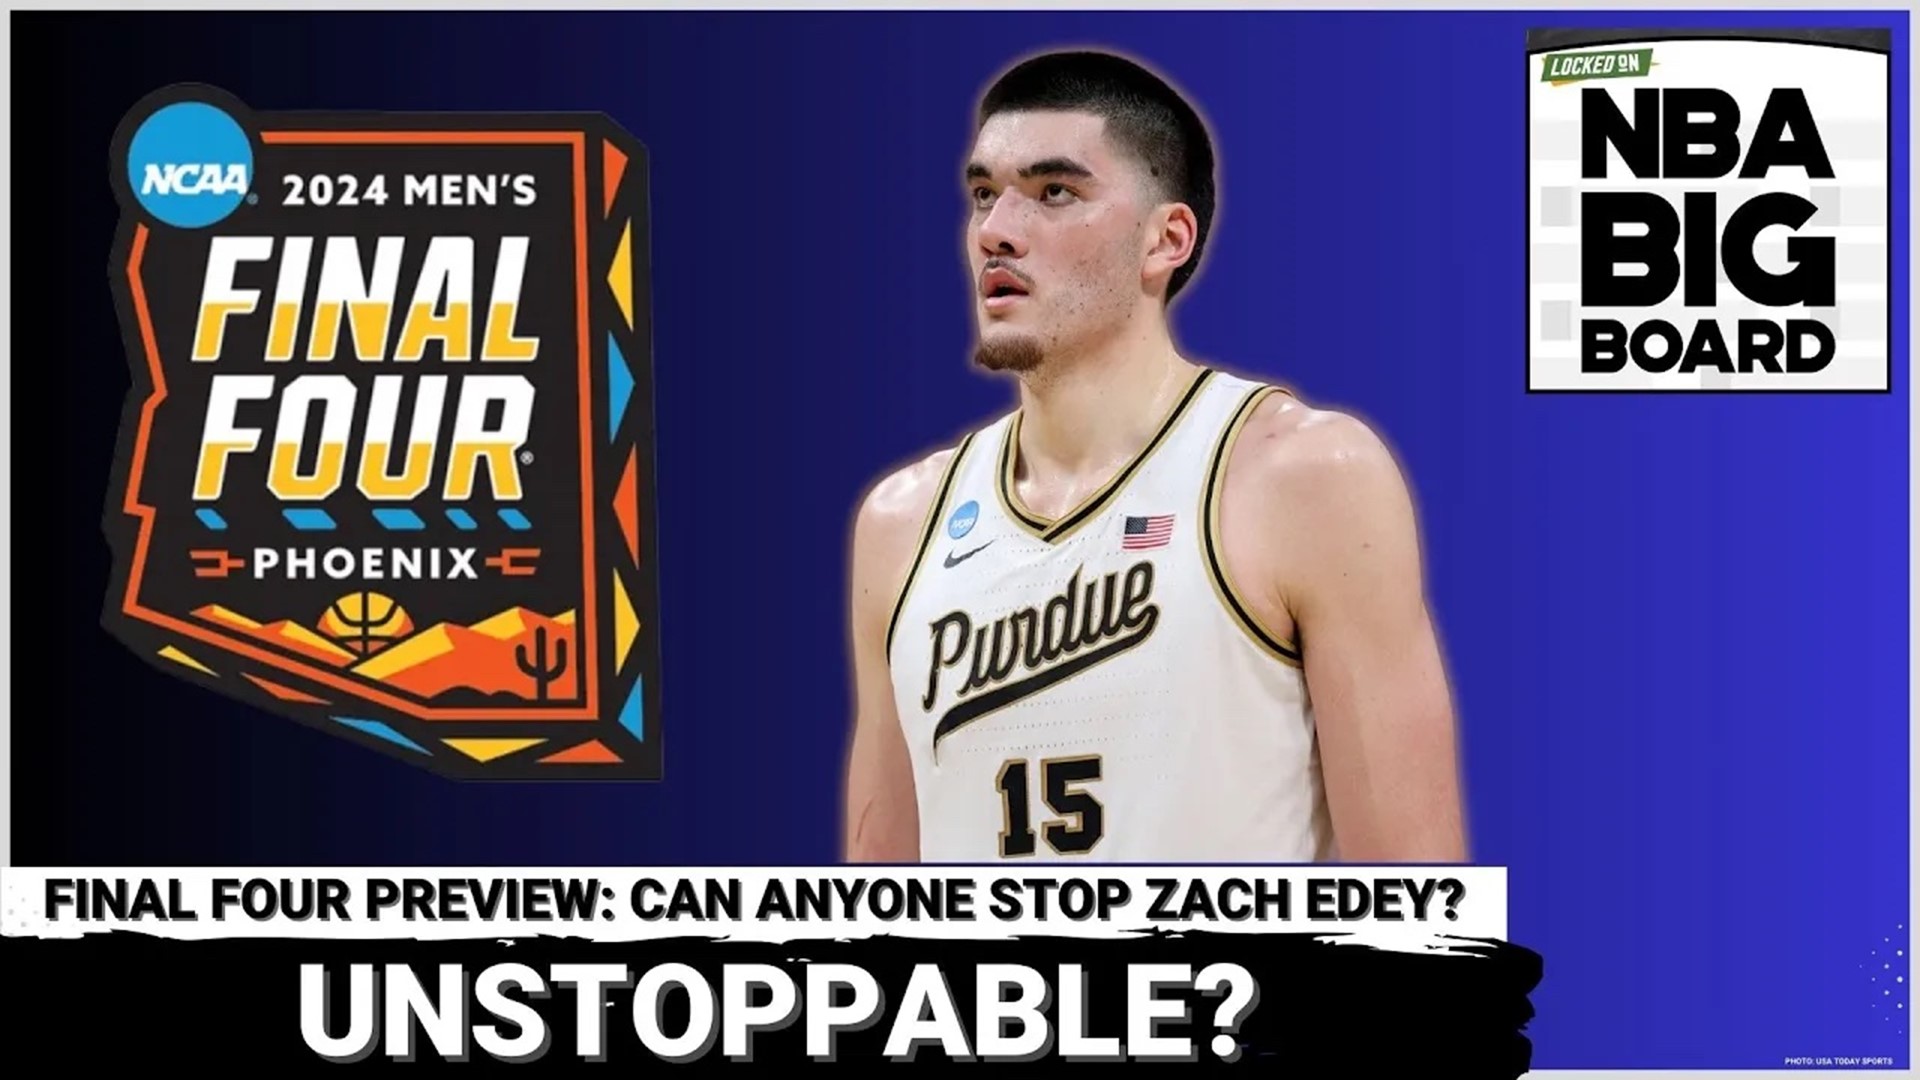 In this episode of the NBA Big Board Podcast, hosts Rafael and James Barlowe shine the spotlight on Purdue's Zach Edey.